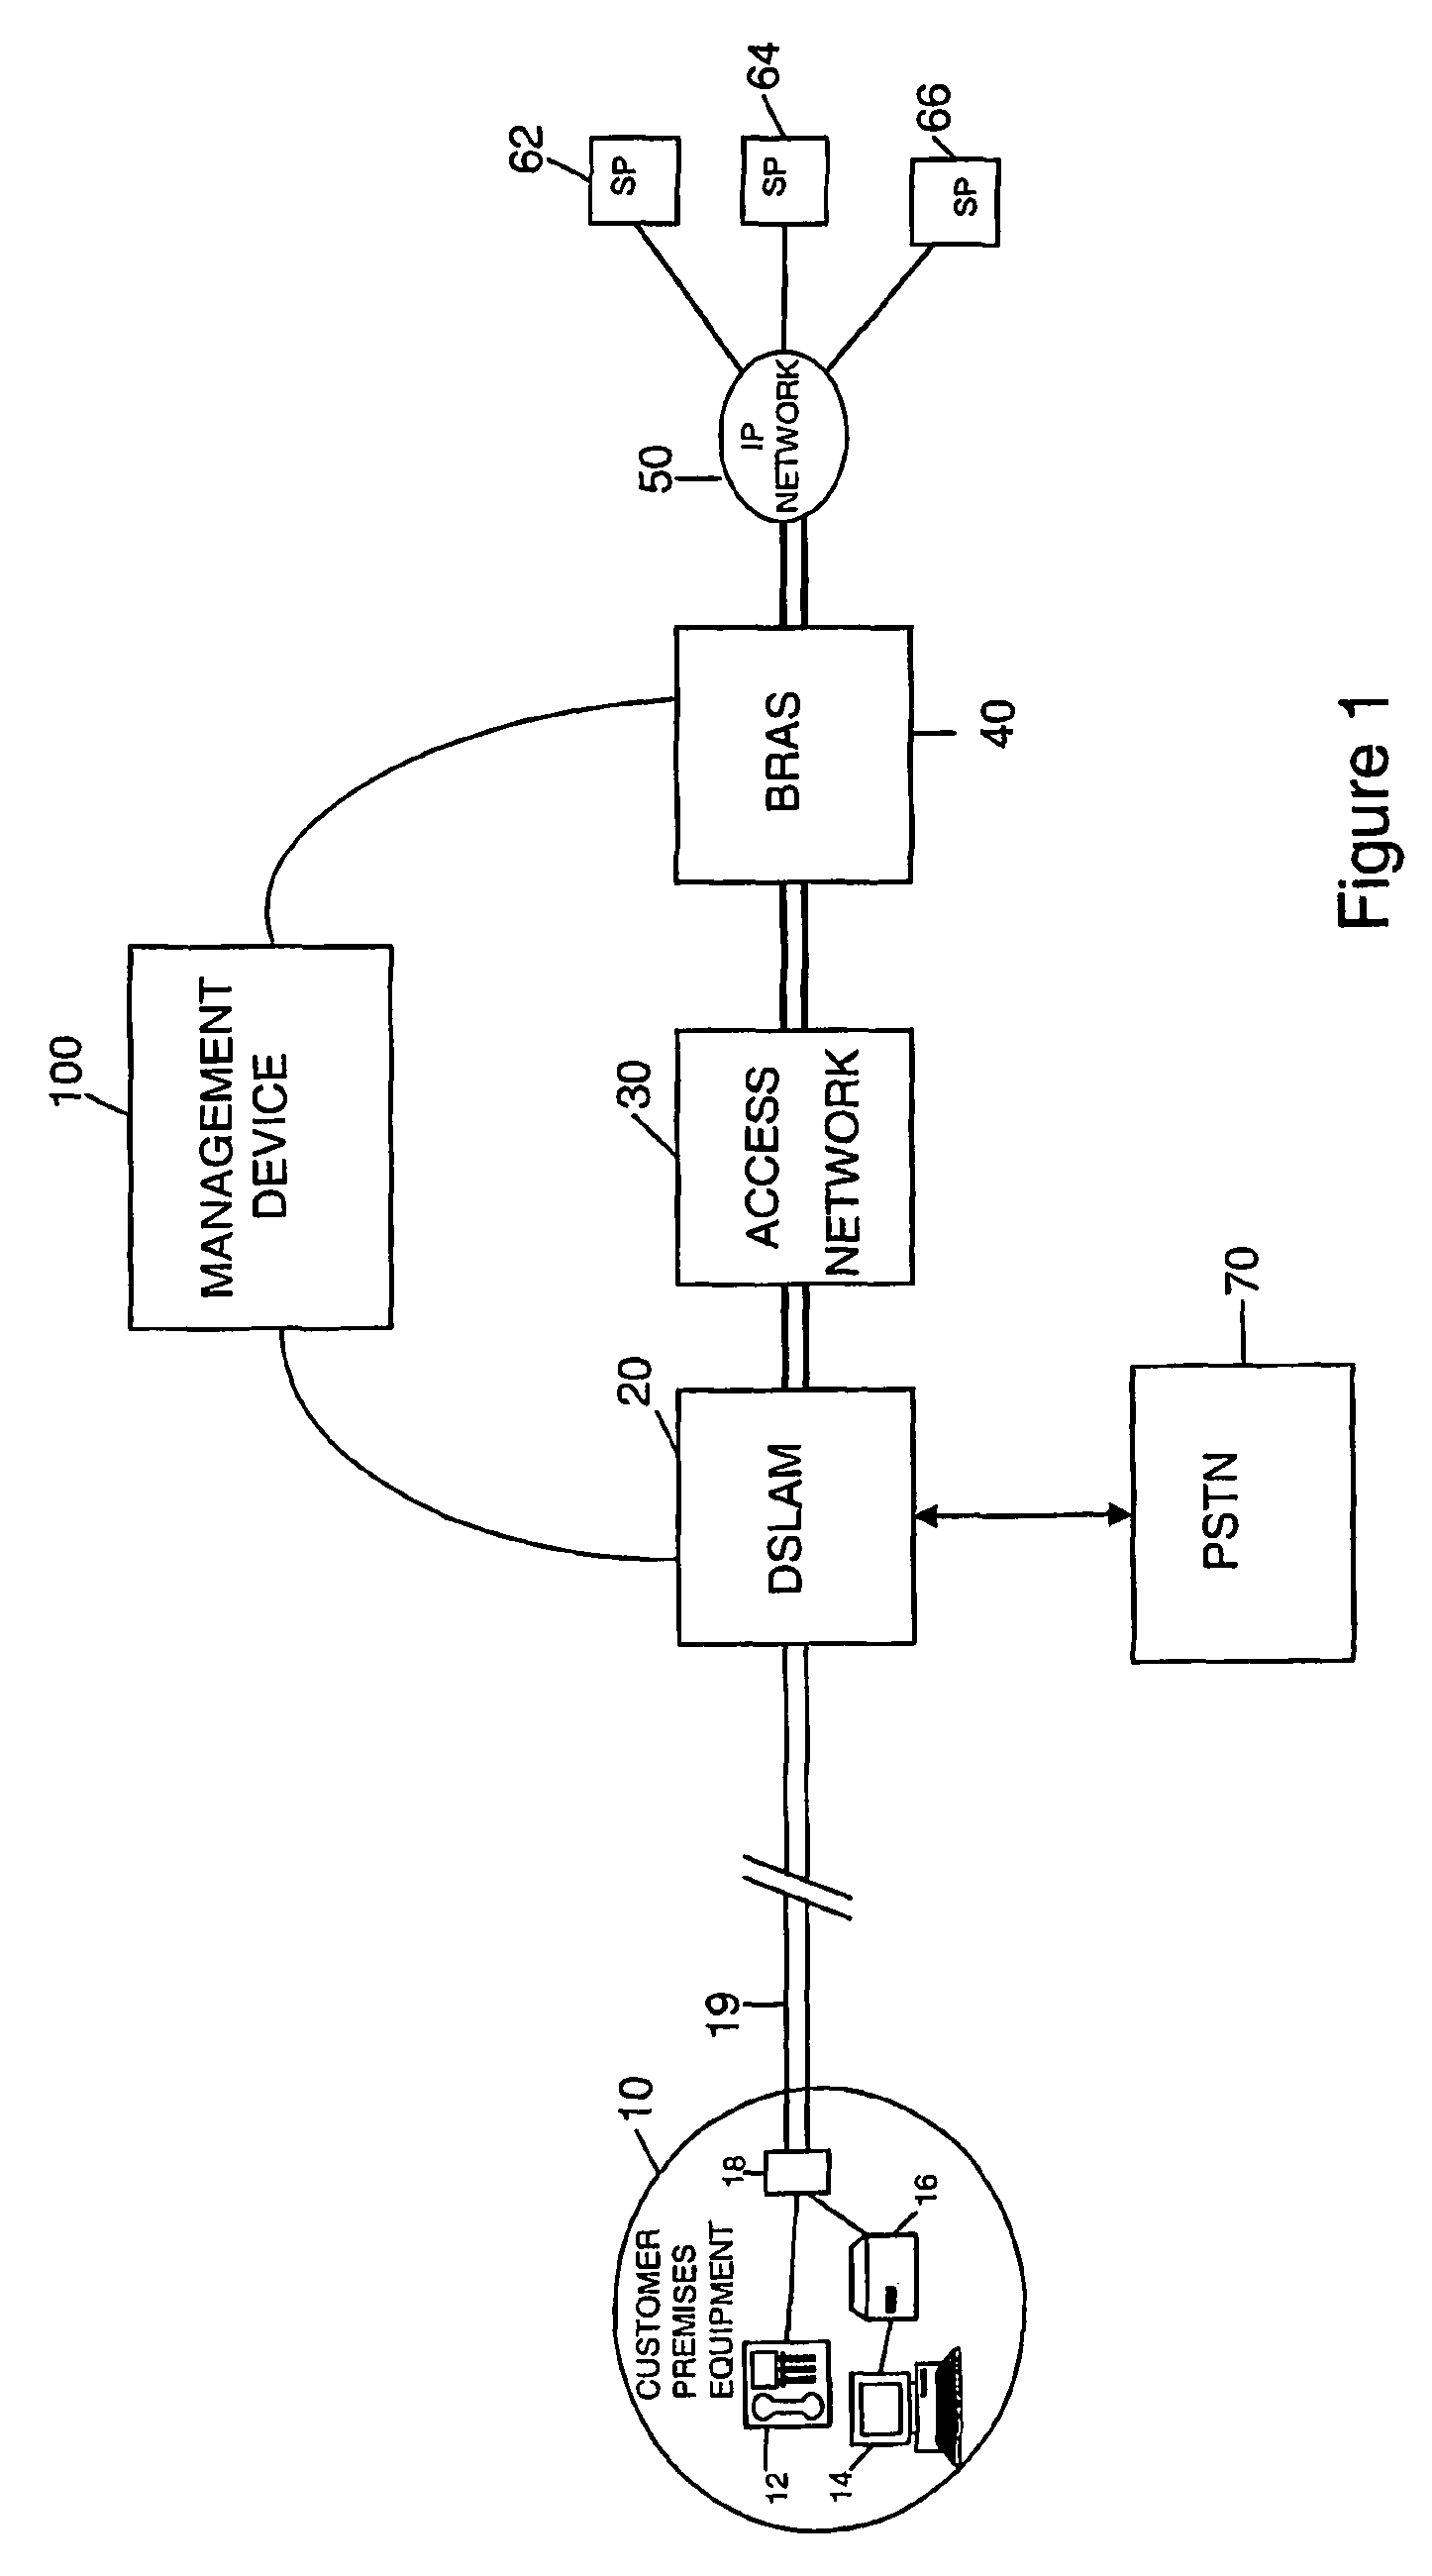 Method and apparatus for communicating data over a data network and controlling an amount of bandwidth a user can transmit or receive over a DSL connection